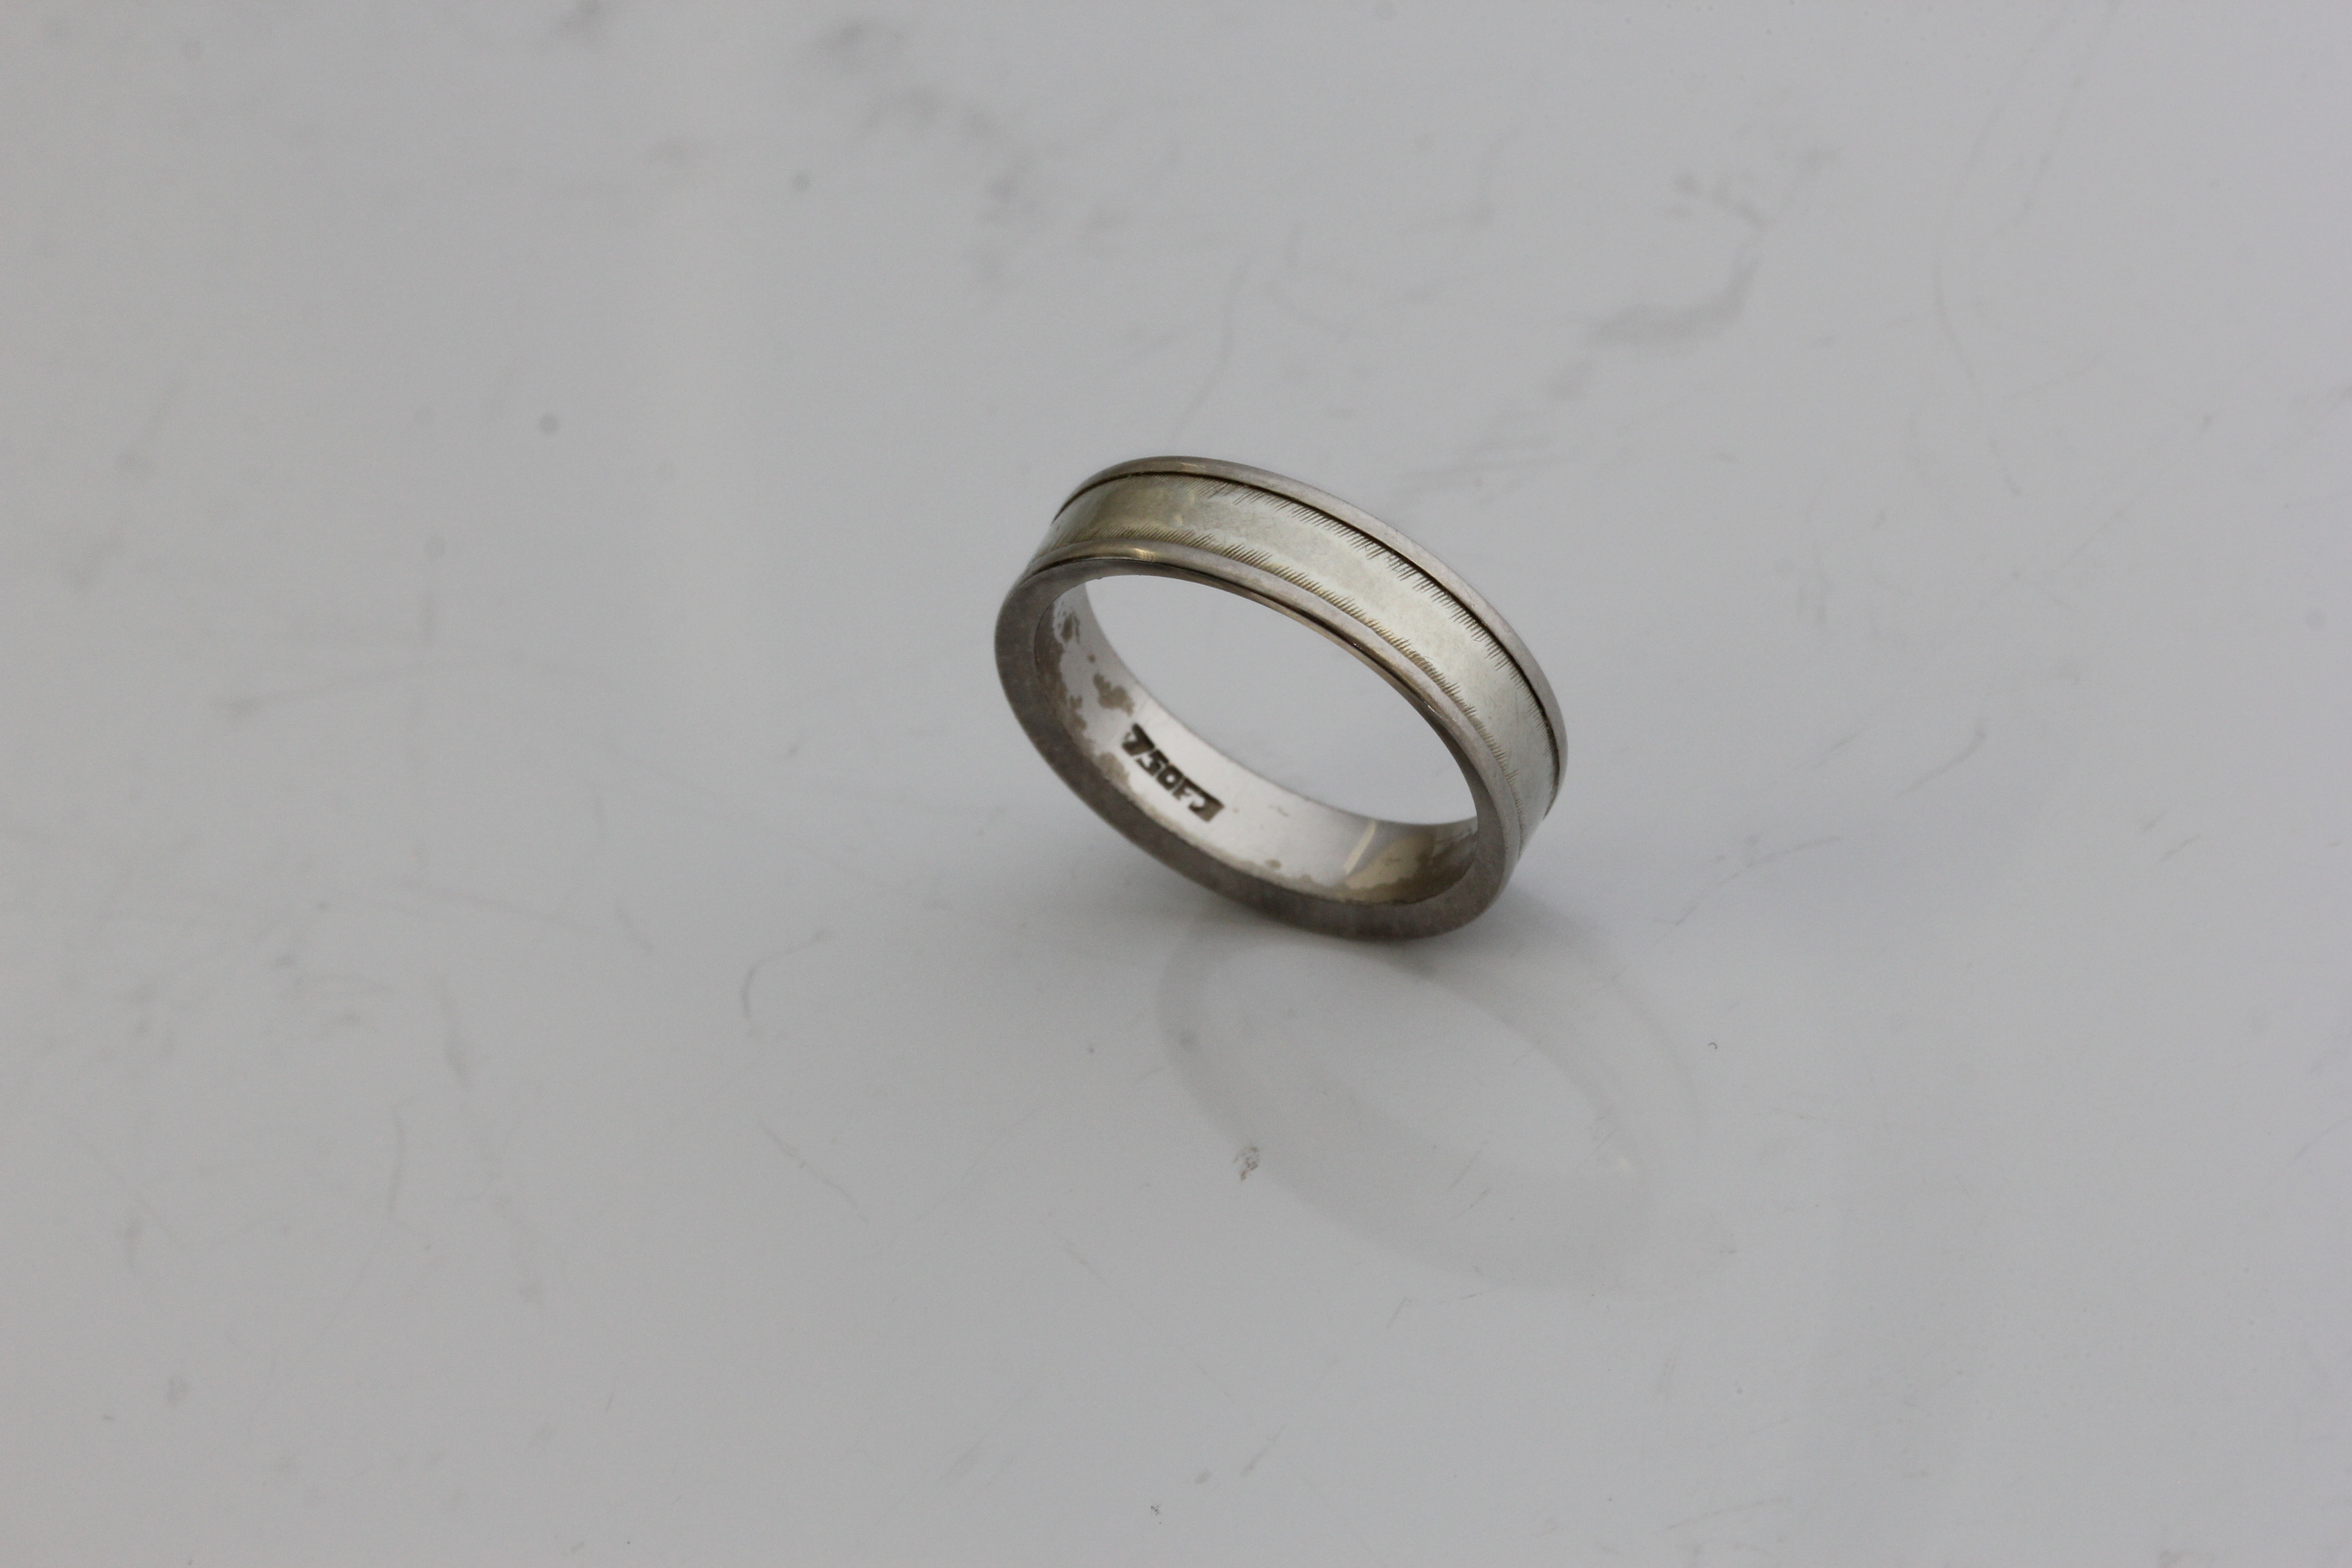 A white gold wedding band ring, marked 750, ring size K 1/2, approx. weight 4.93gms. Online - Image 2 of 4